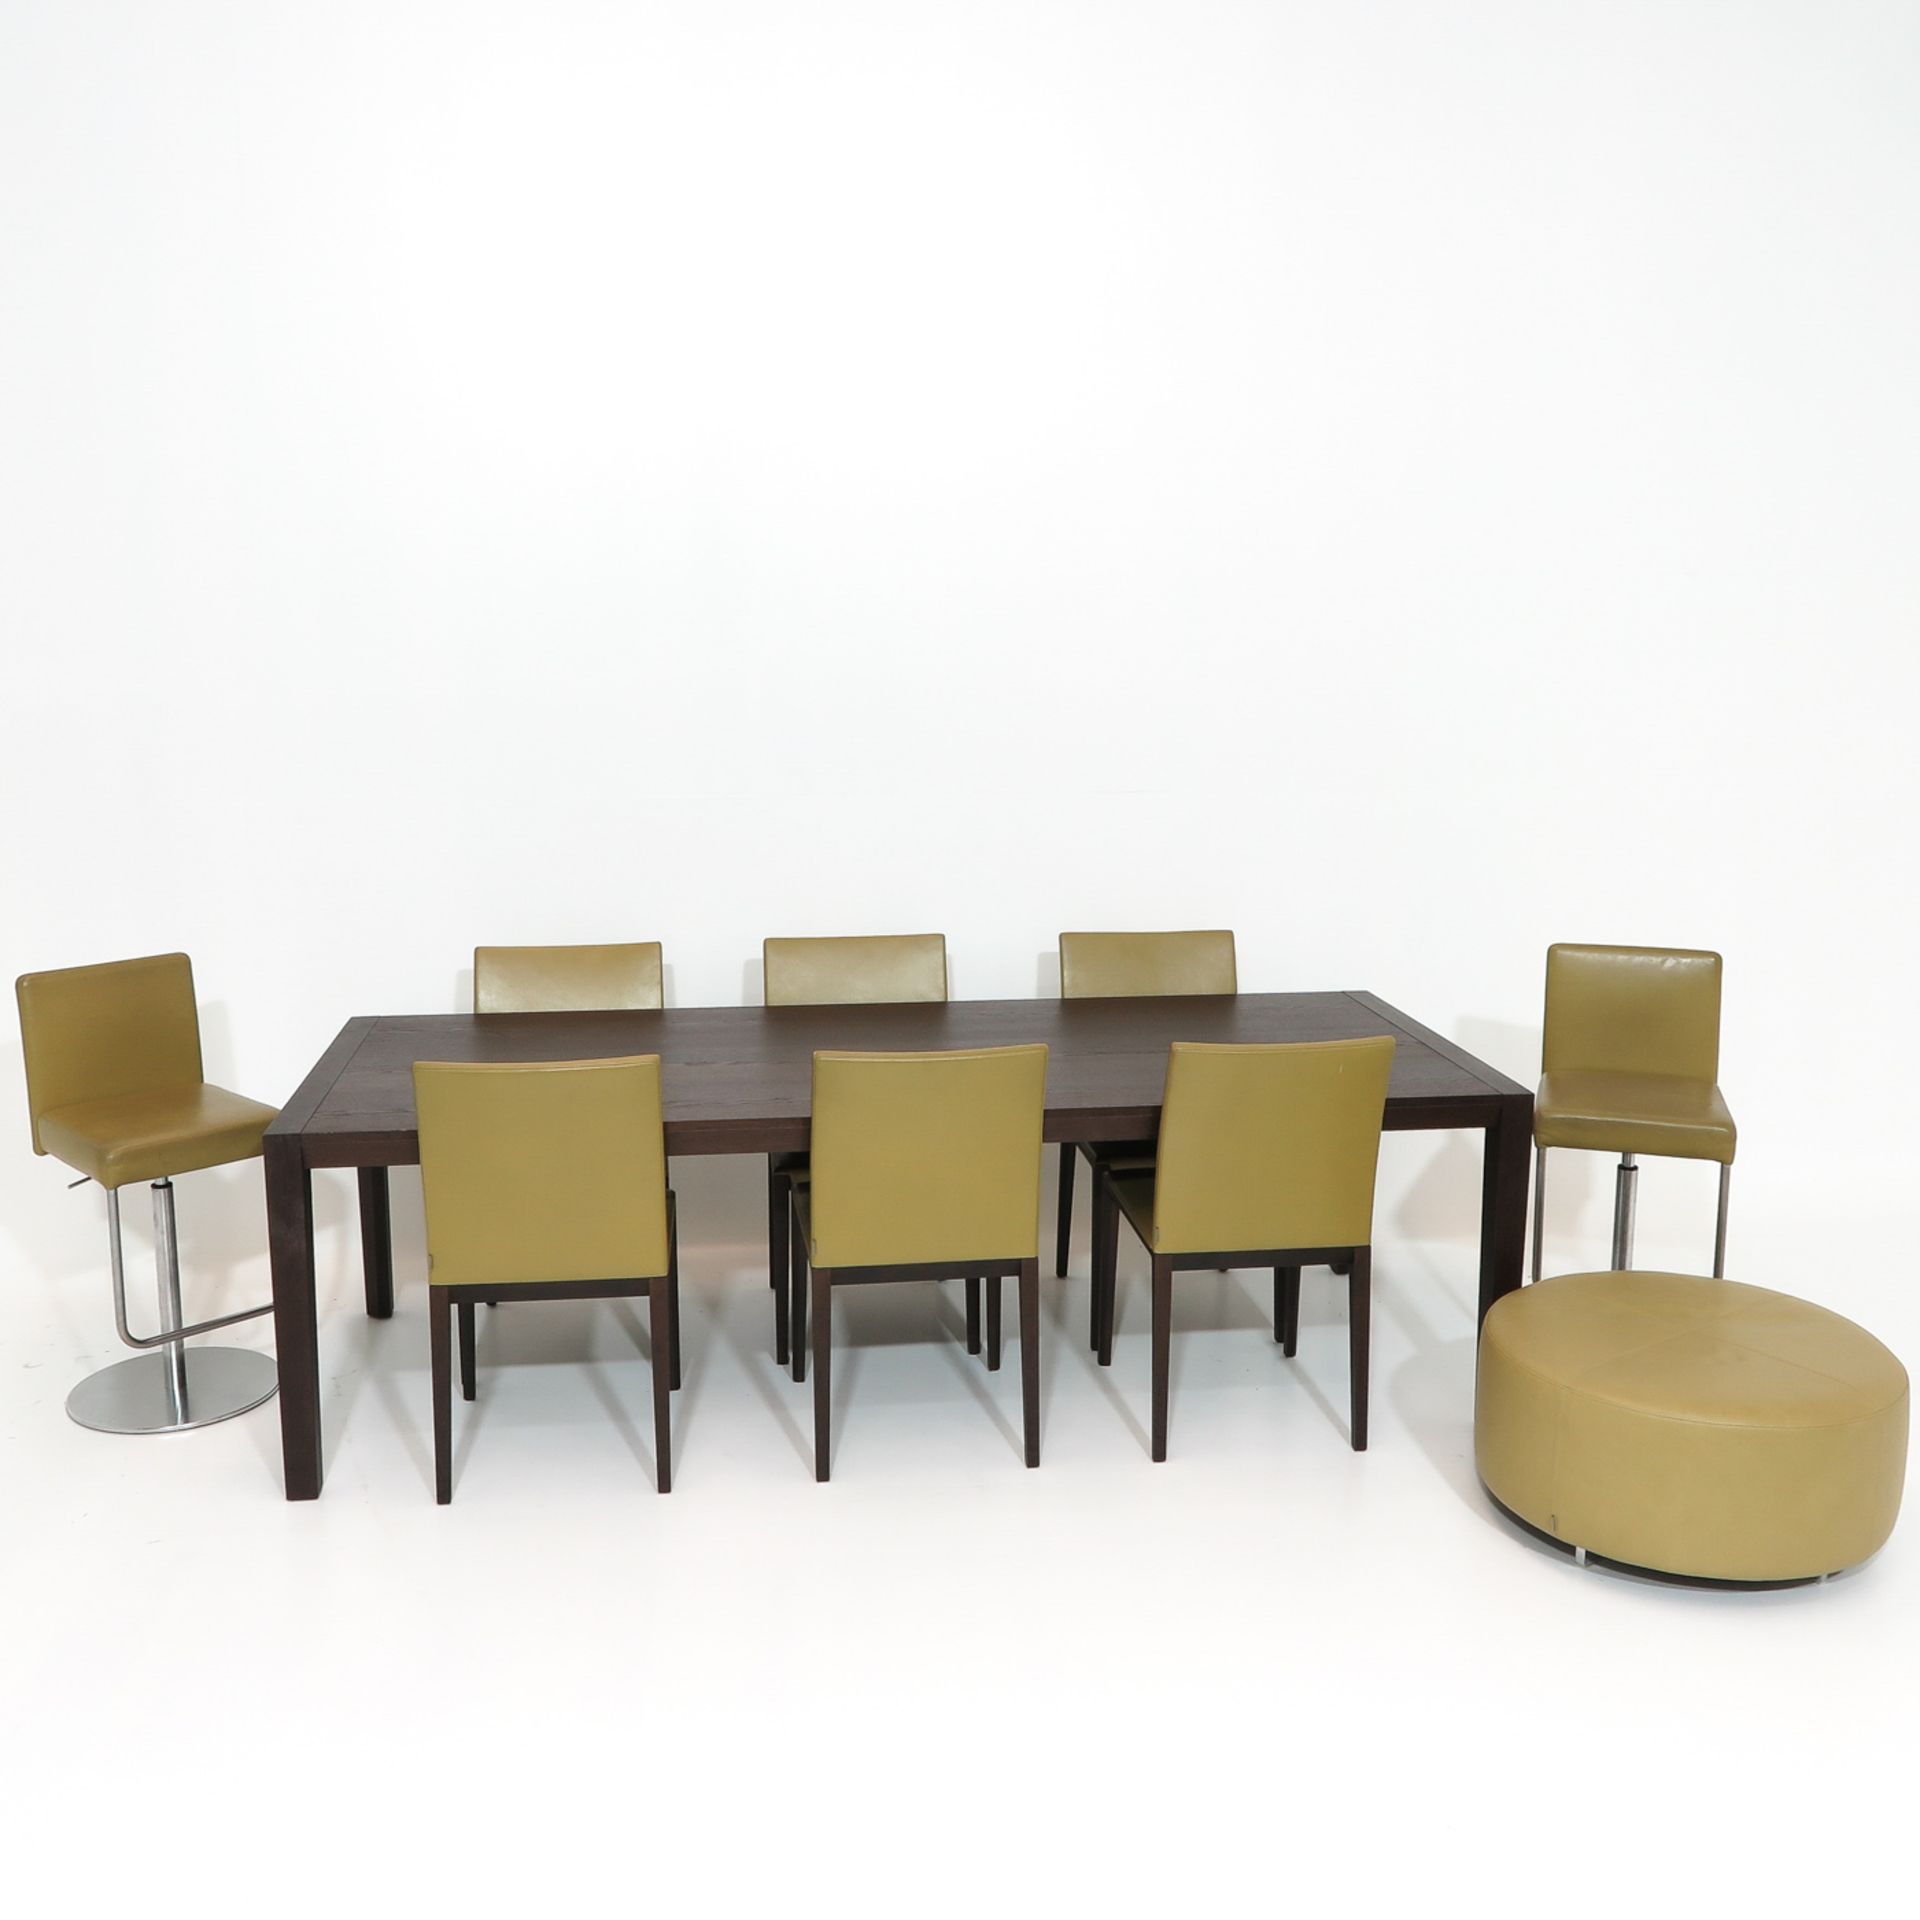 A Walter Knoll Design Table with Chairs and Barstools